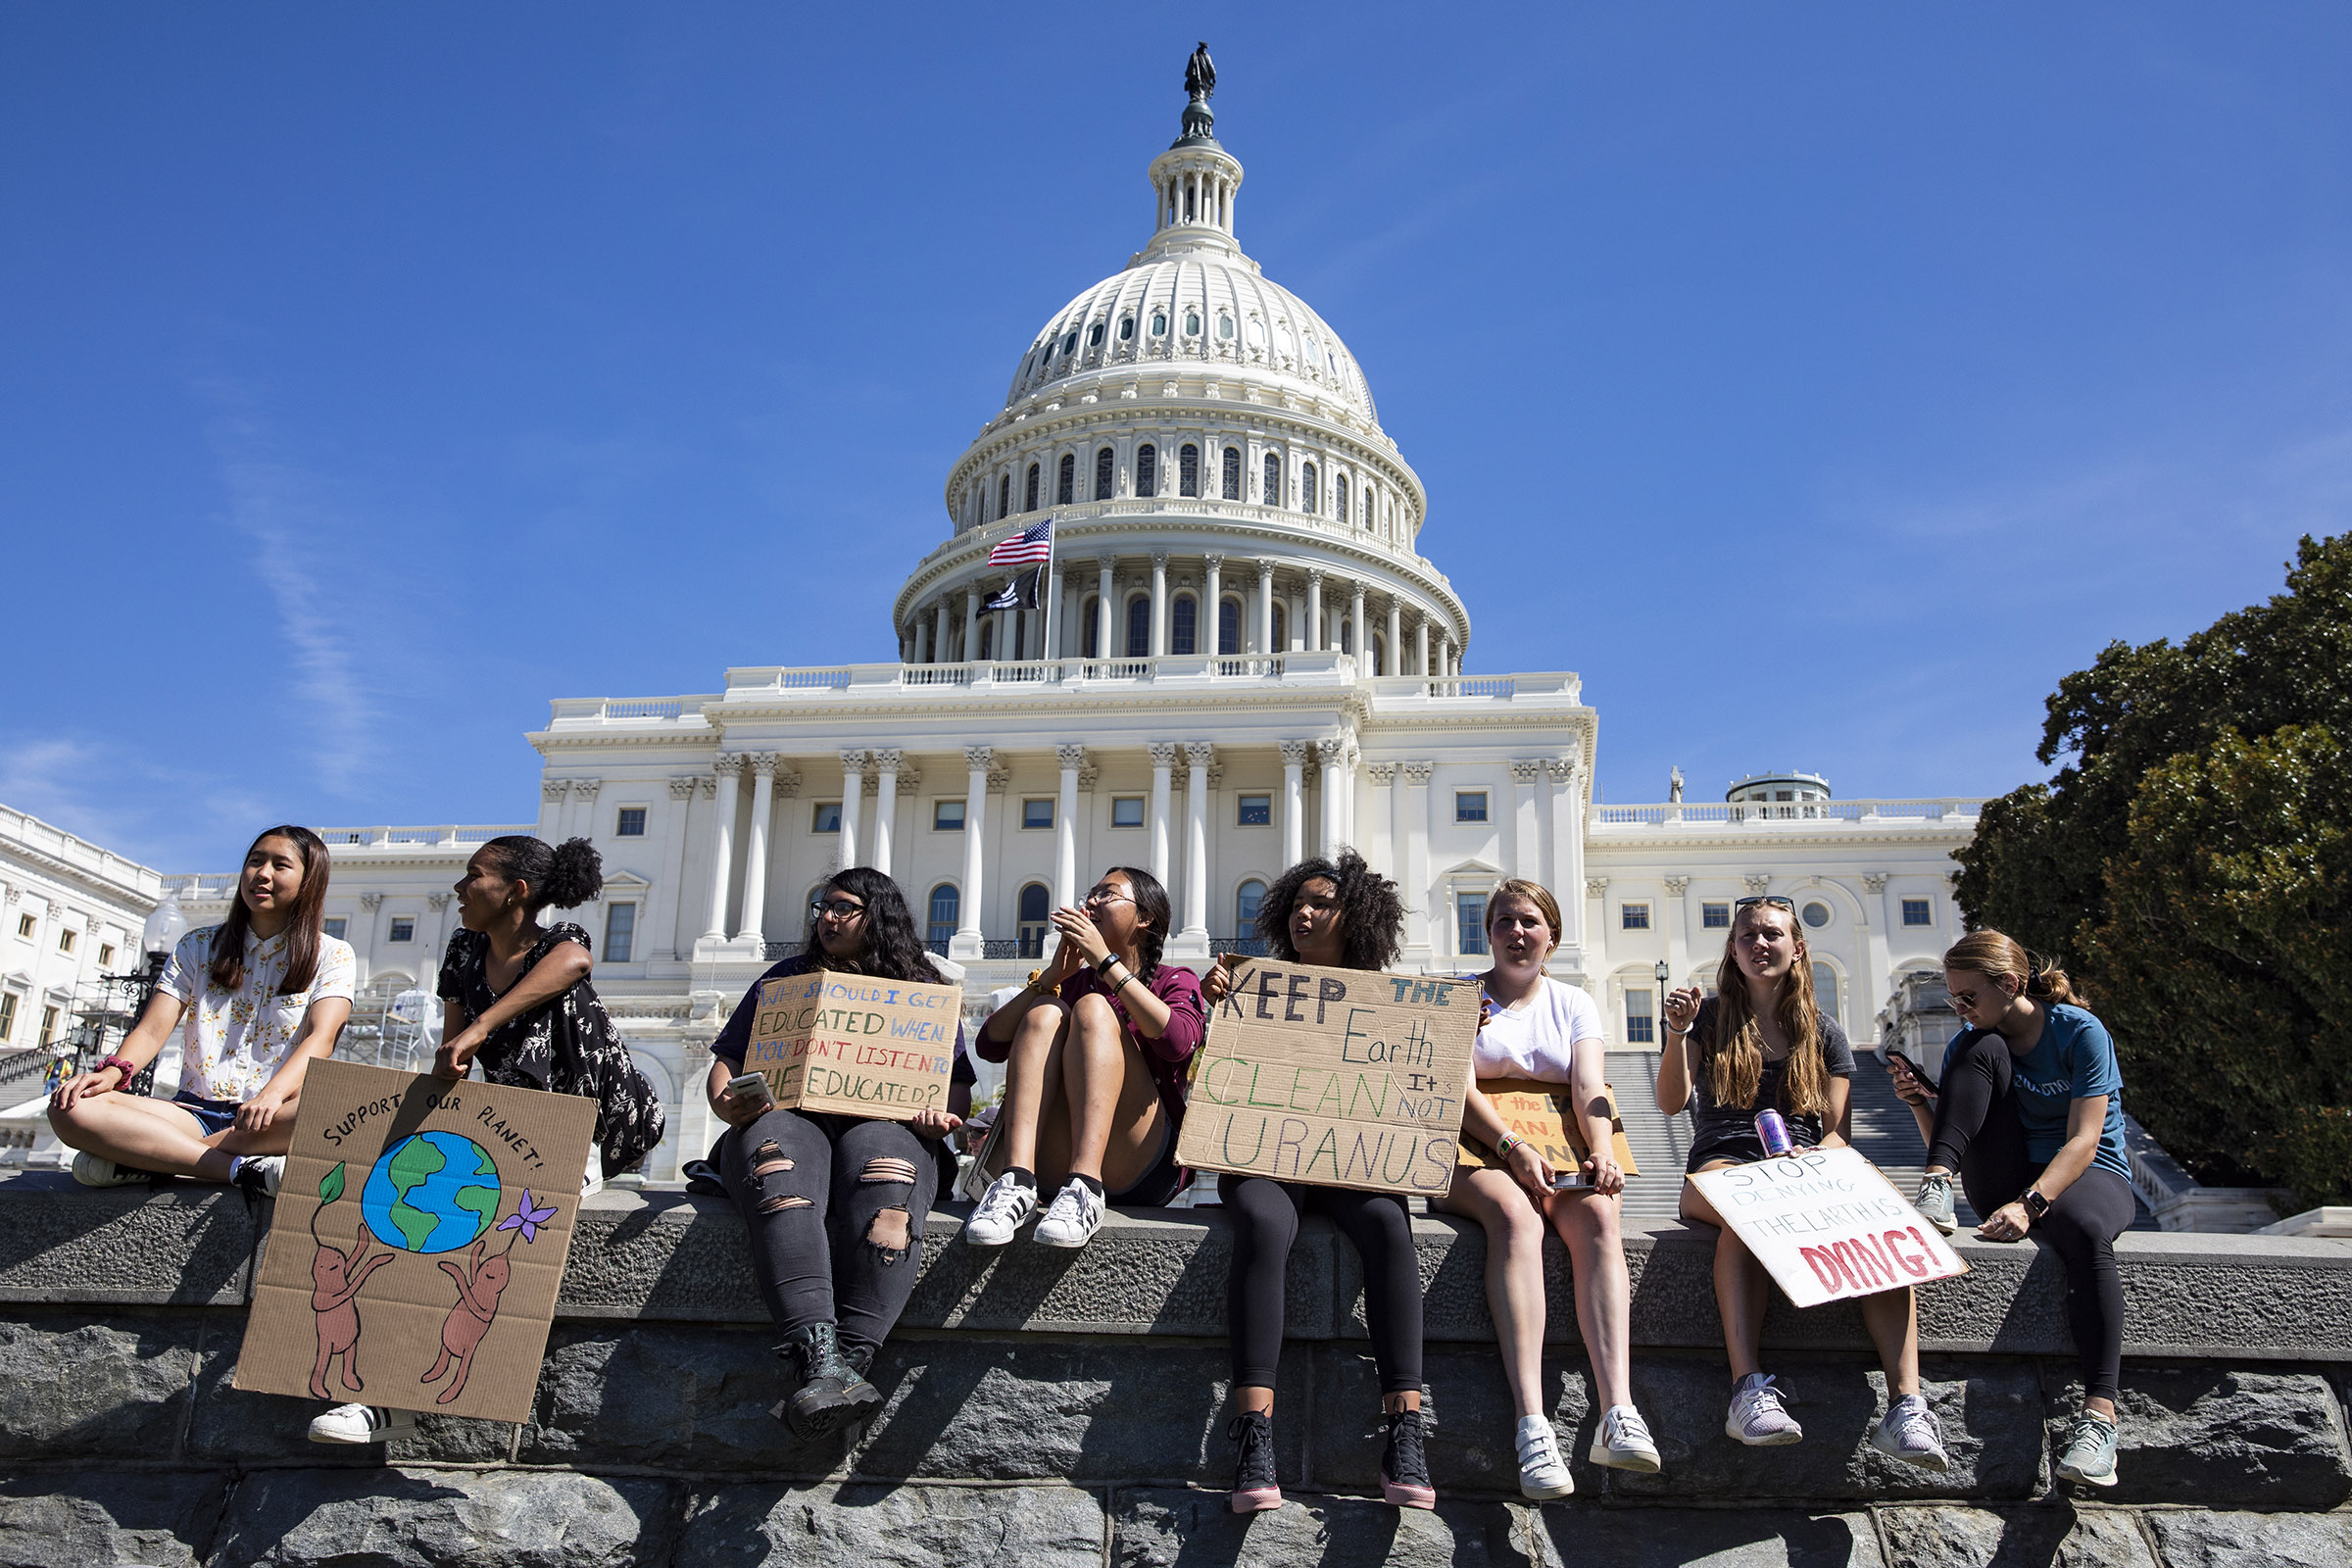 Teens sit along a wall at the U.S. Capitol during the Global Climate Strike rally on September 20, 2019 in Washington, DC. (Samuel Corum—Getty Images)